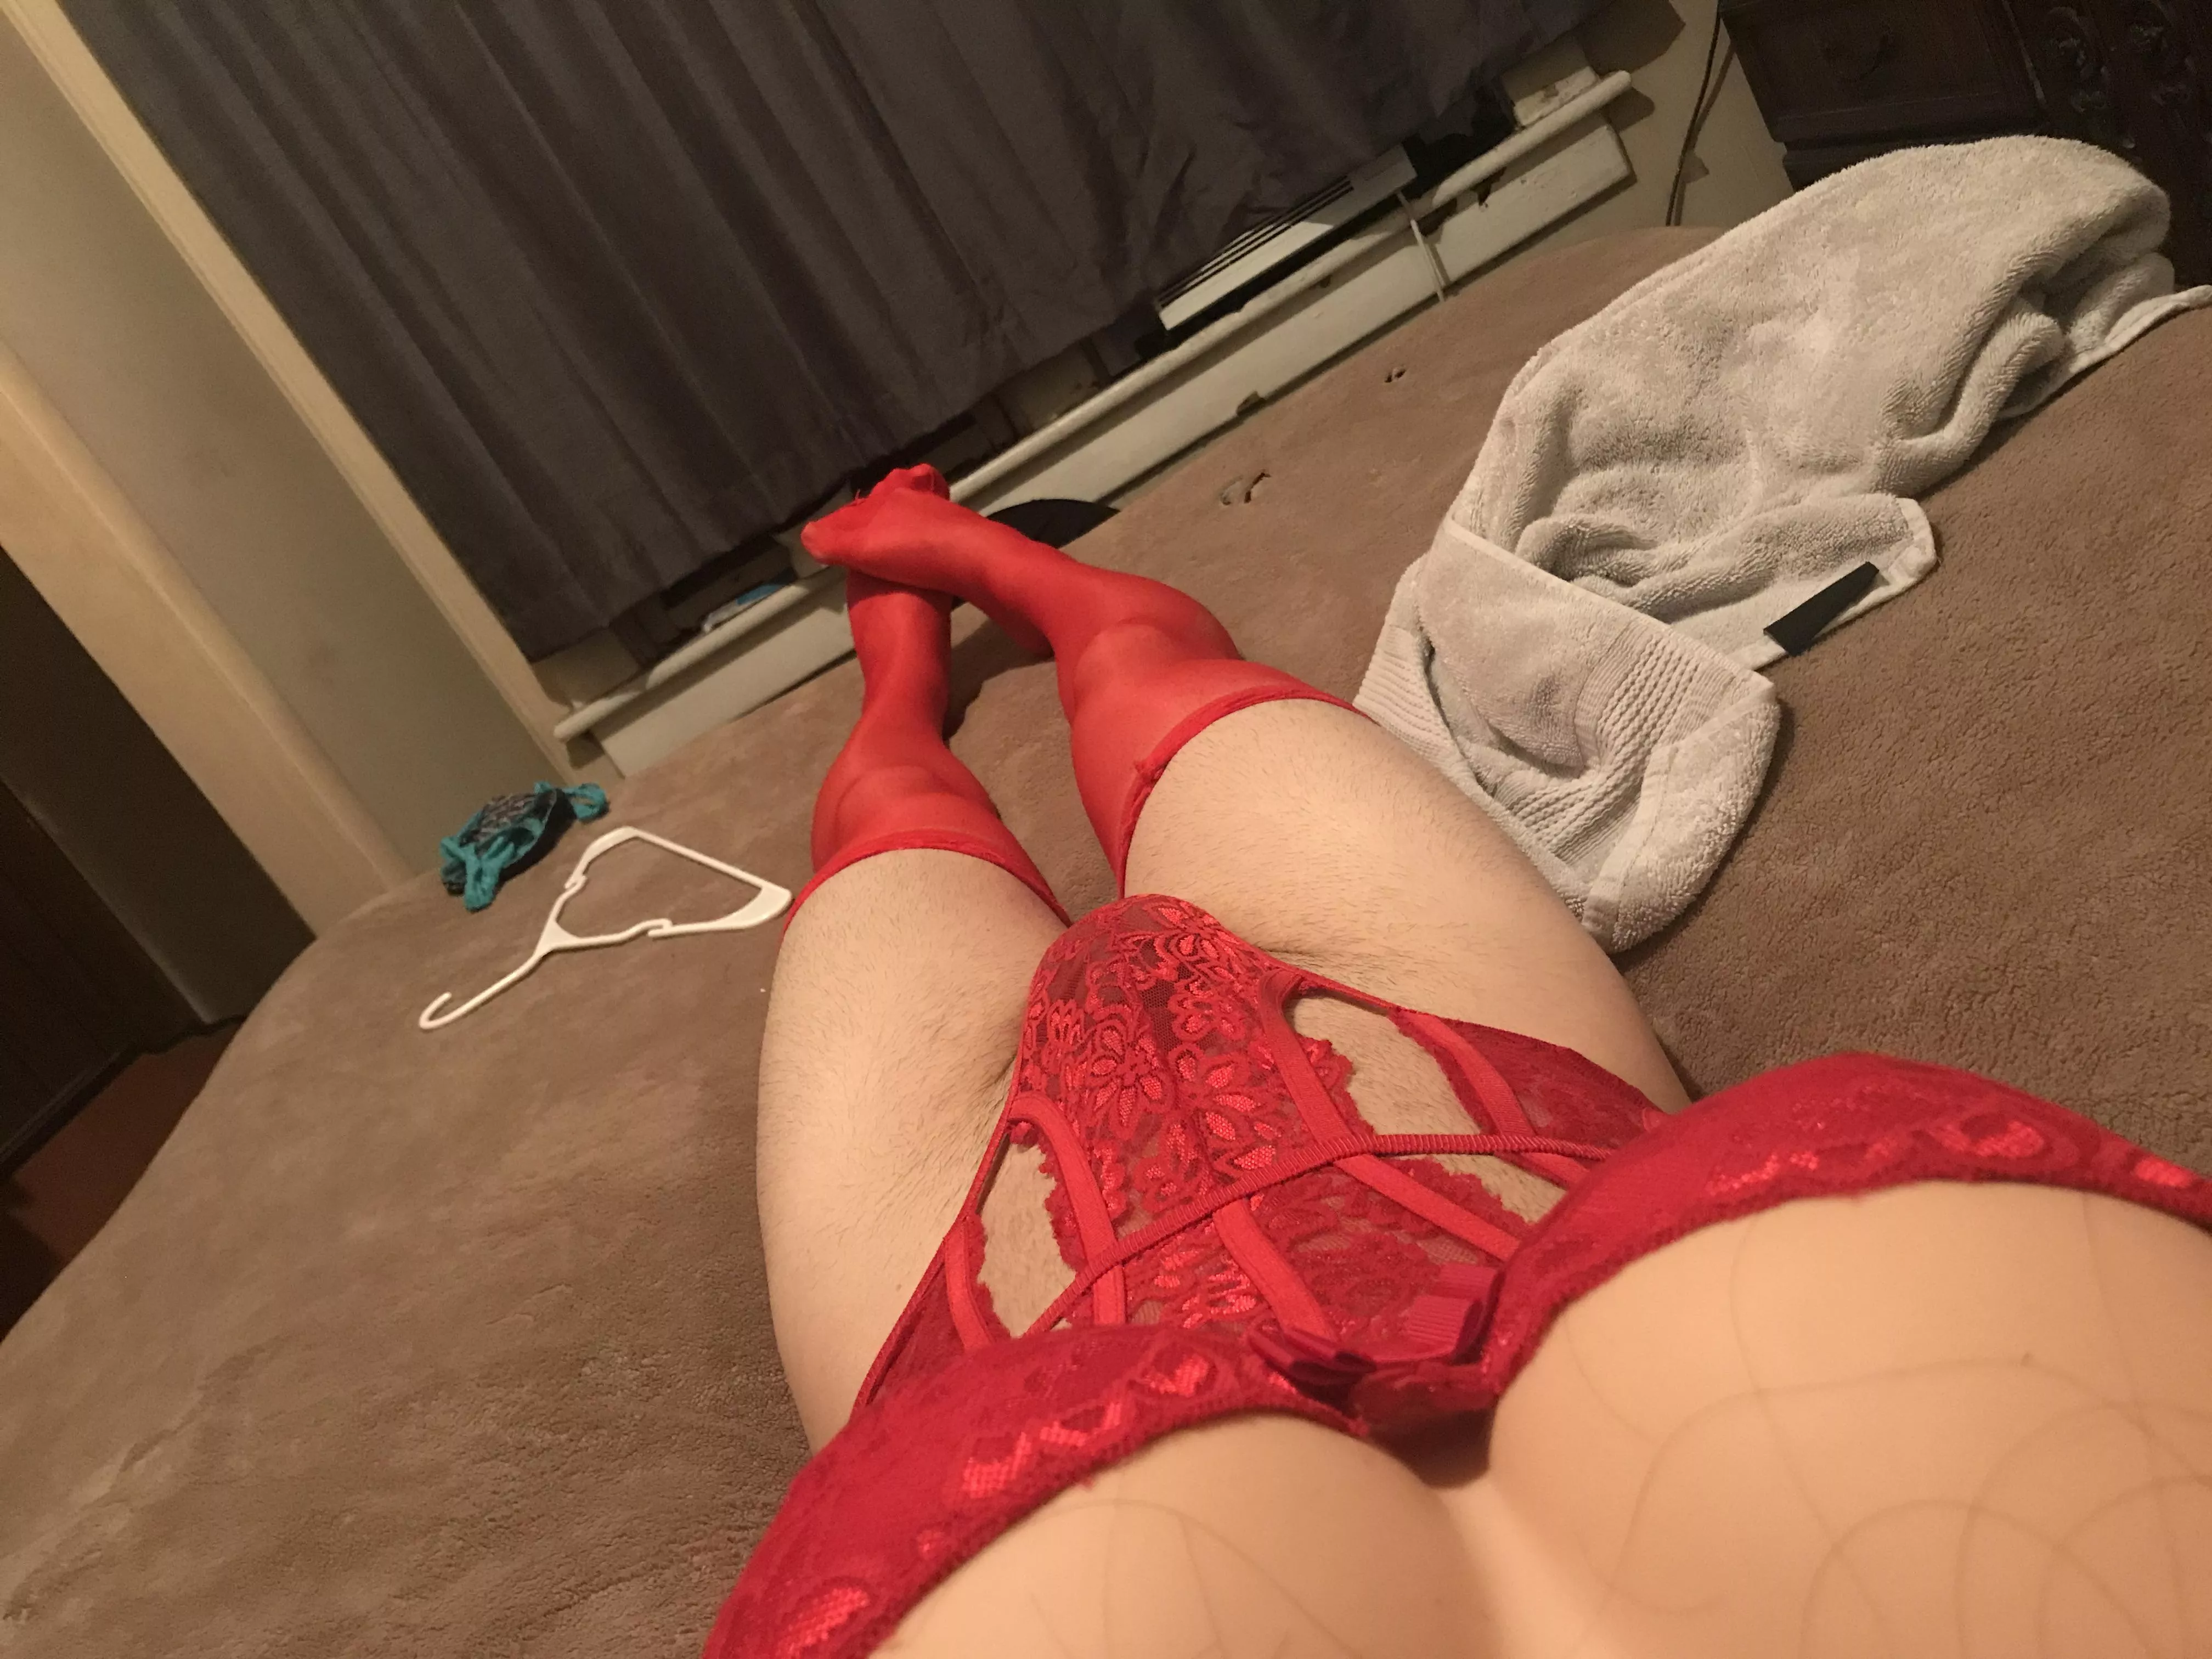 Be sissy porn in Pittsburgh